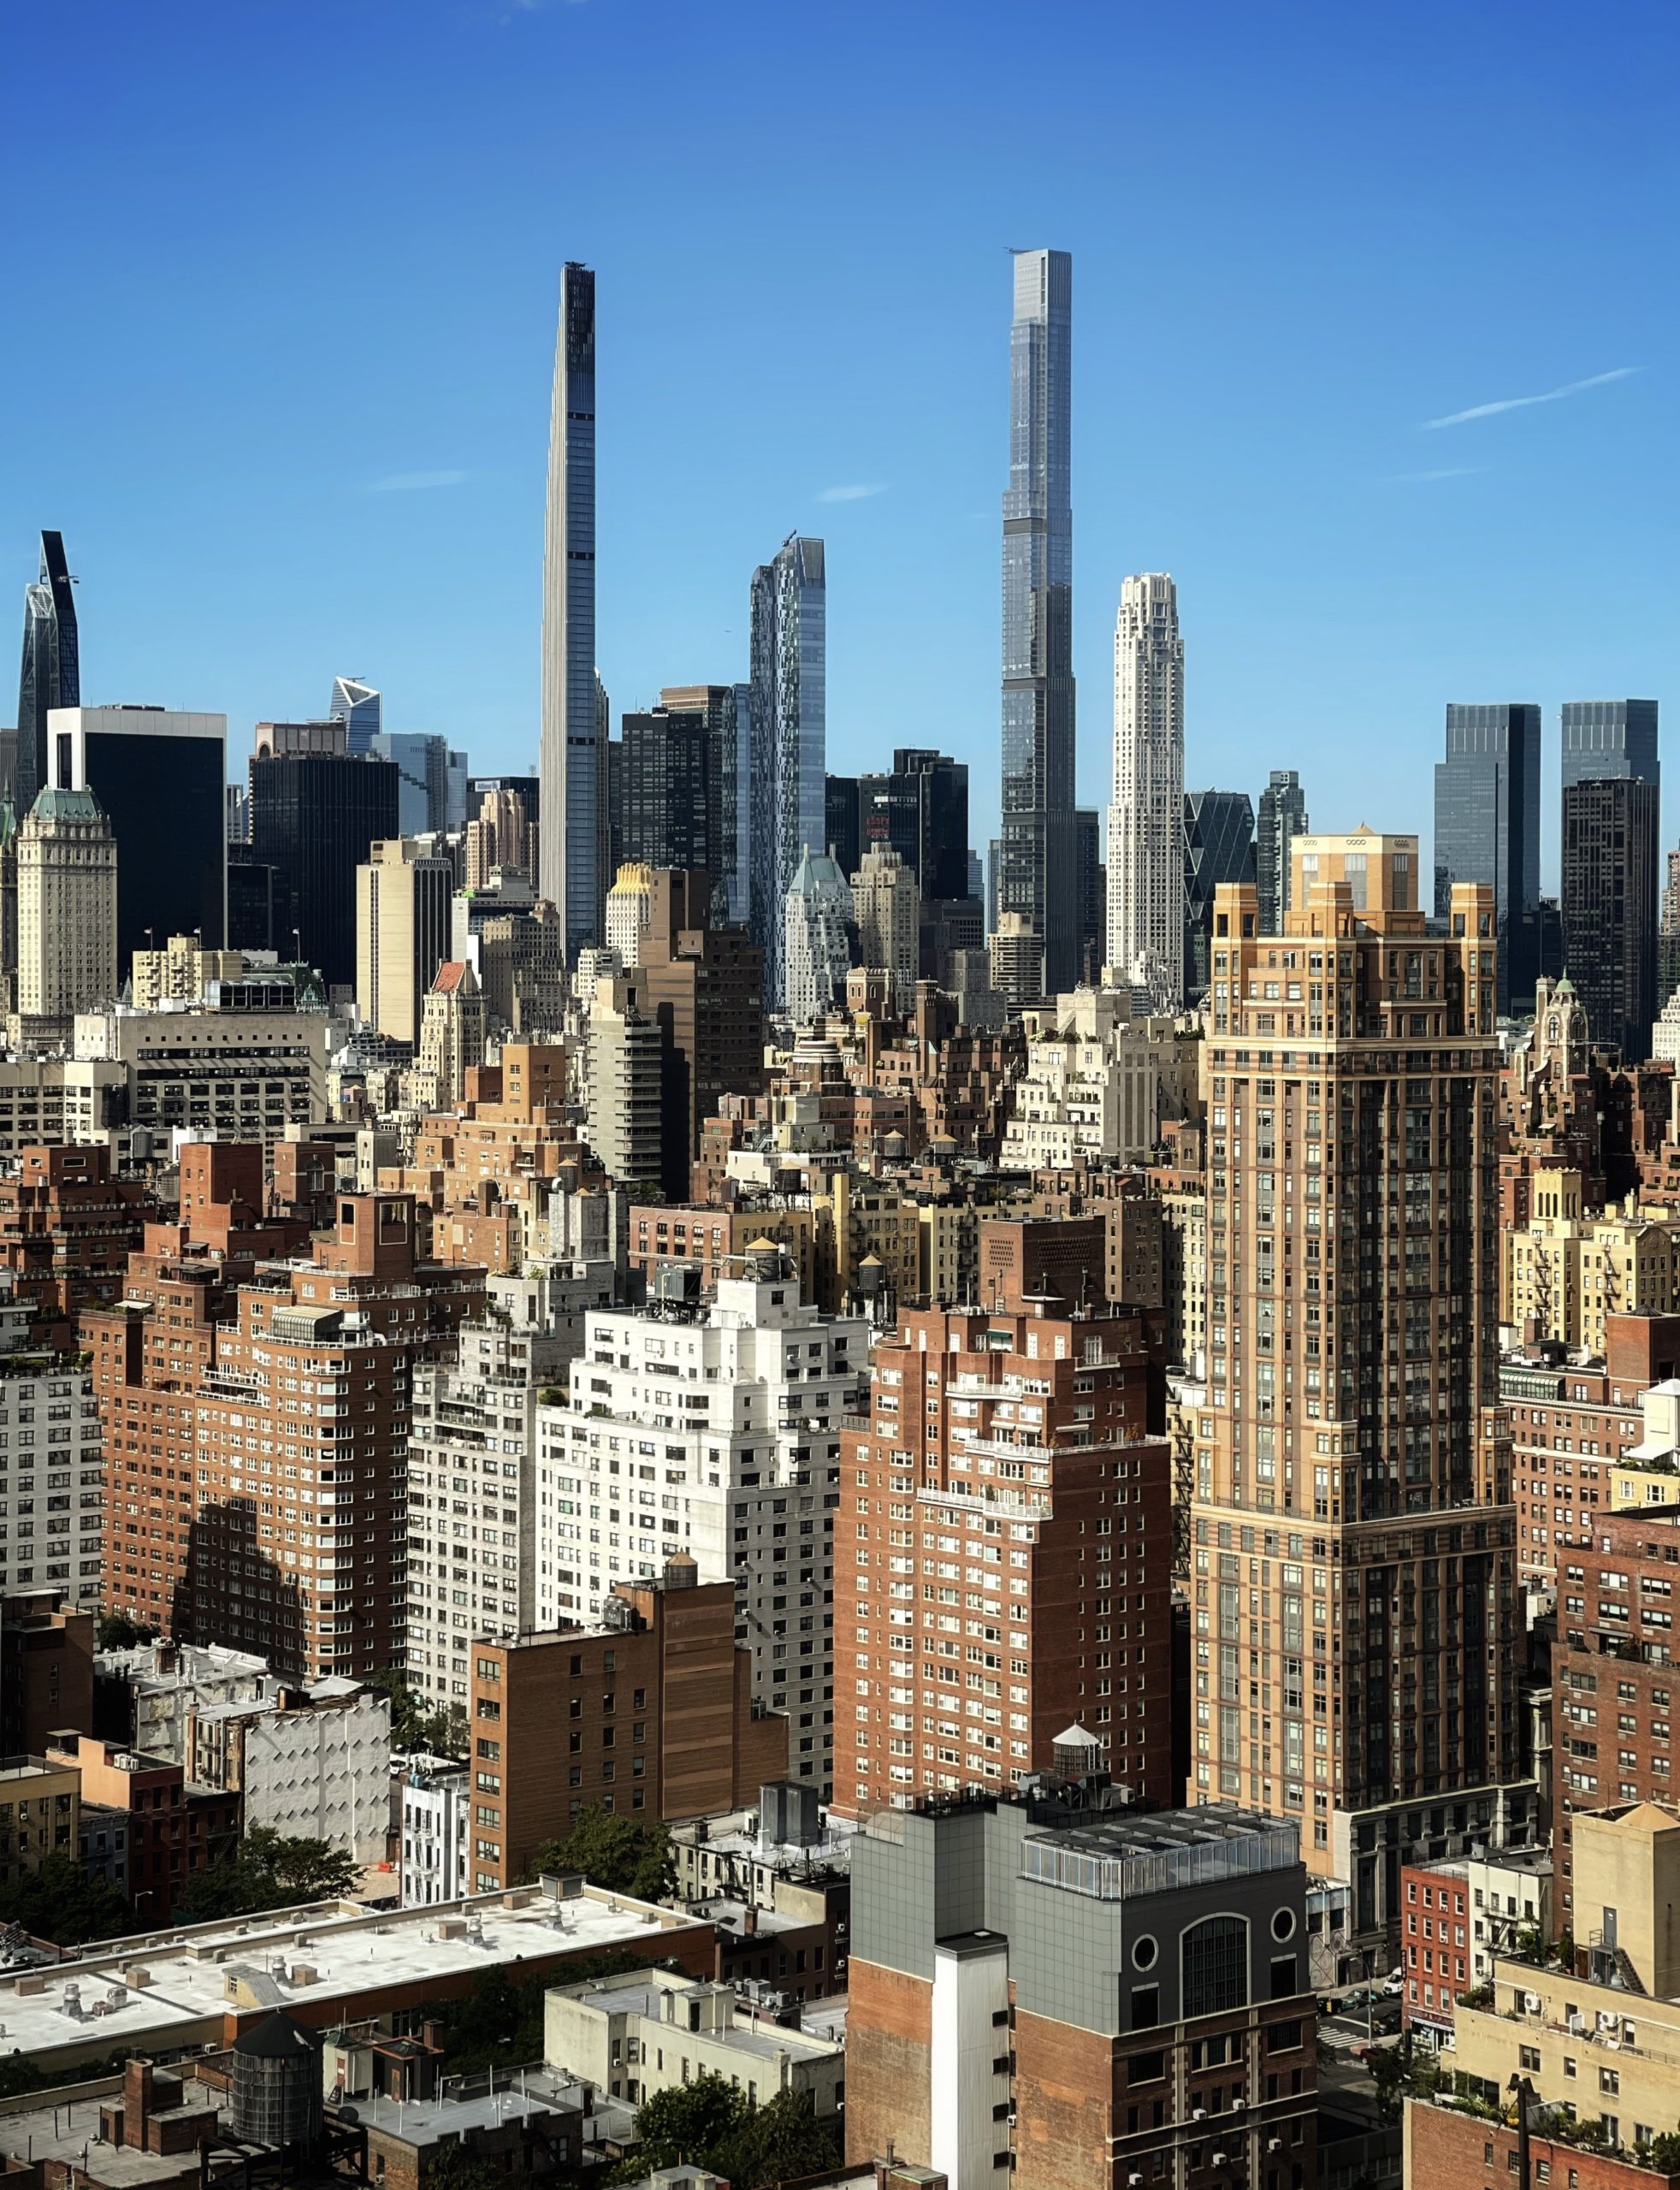 Studio Sofield Reveals Residential Amenities at 111 West 57th Street in  Midtown, Manhattan - New York YIMBY